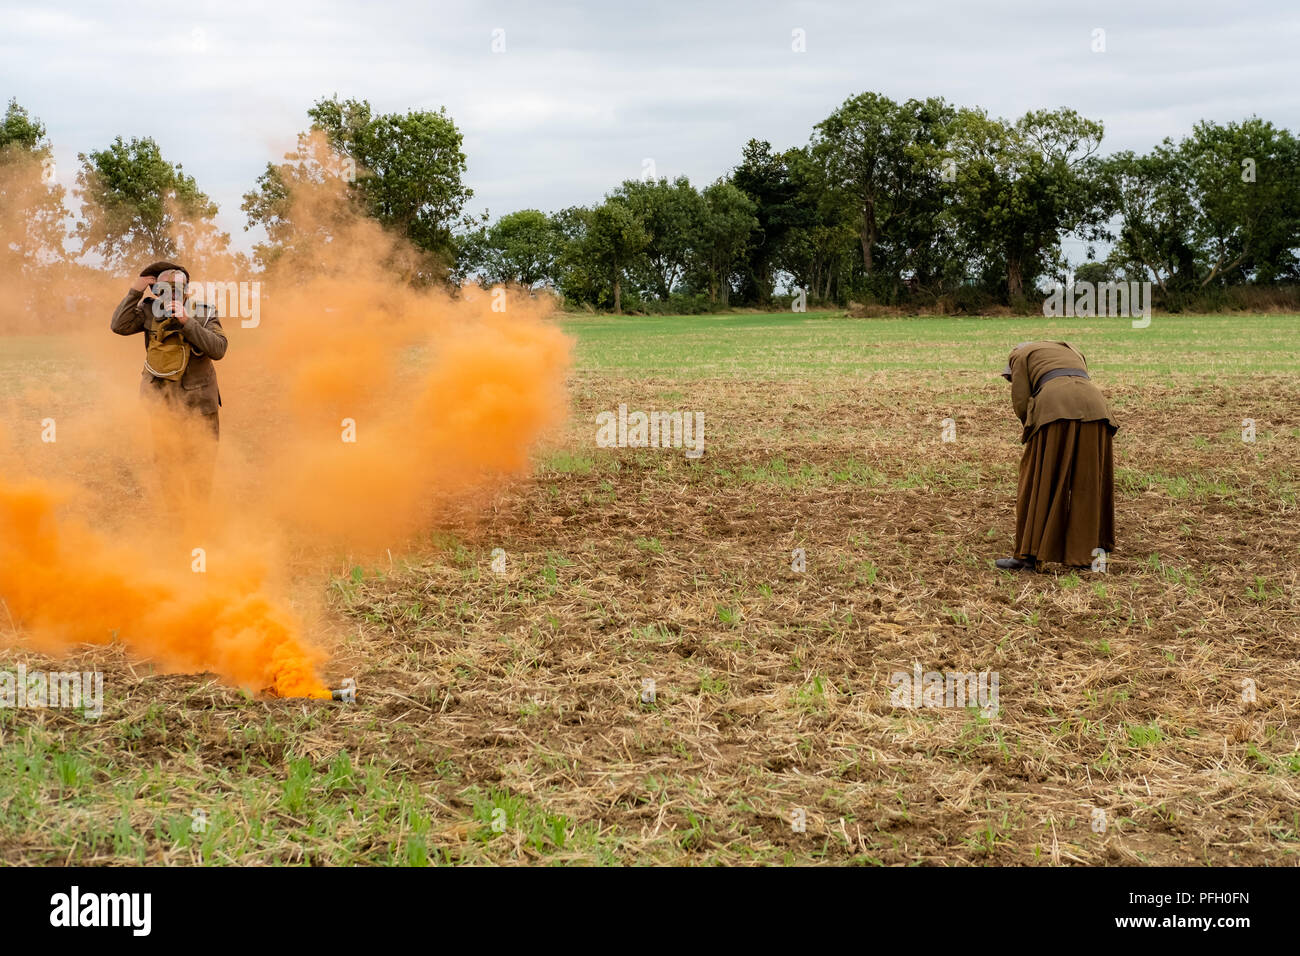 WW1 battle scene depicting a mustard gas attack on British troops, depicted by the orange smoke. Stock Photo